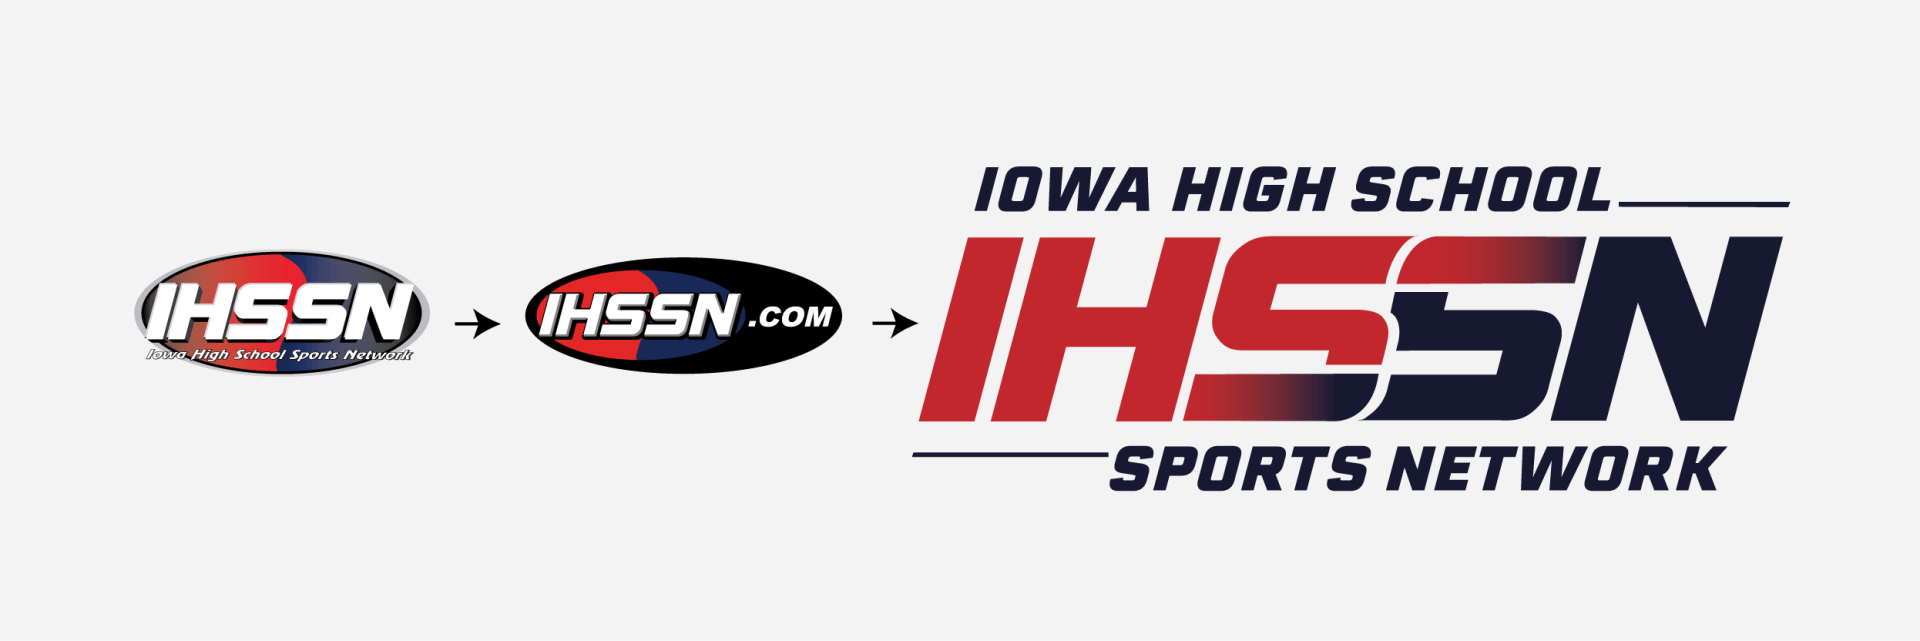 A logo for the iowa high school sports network